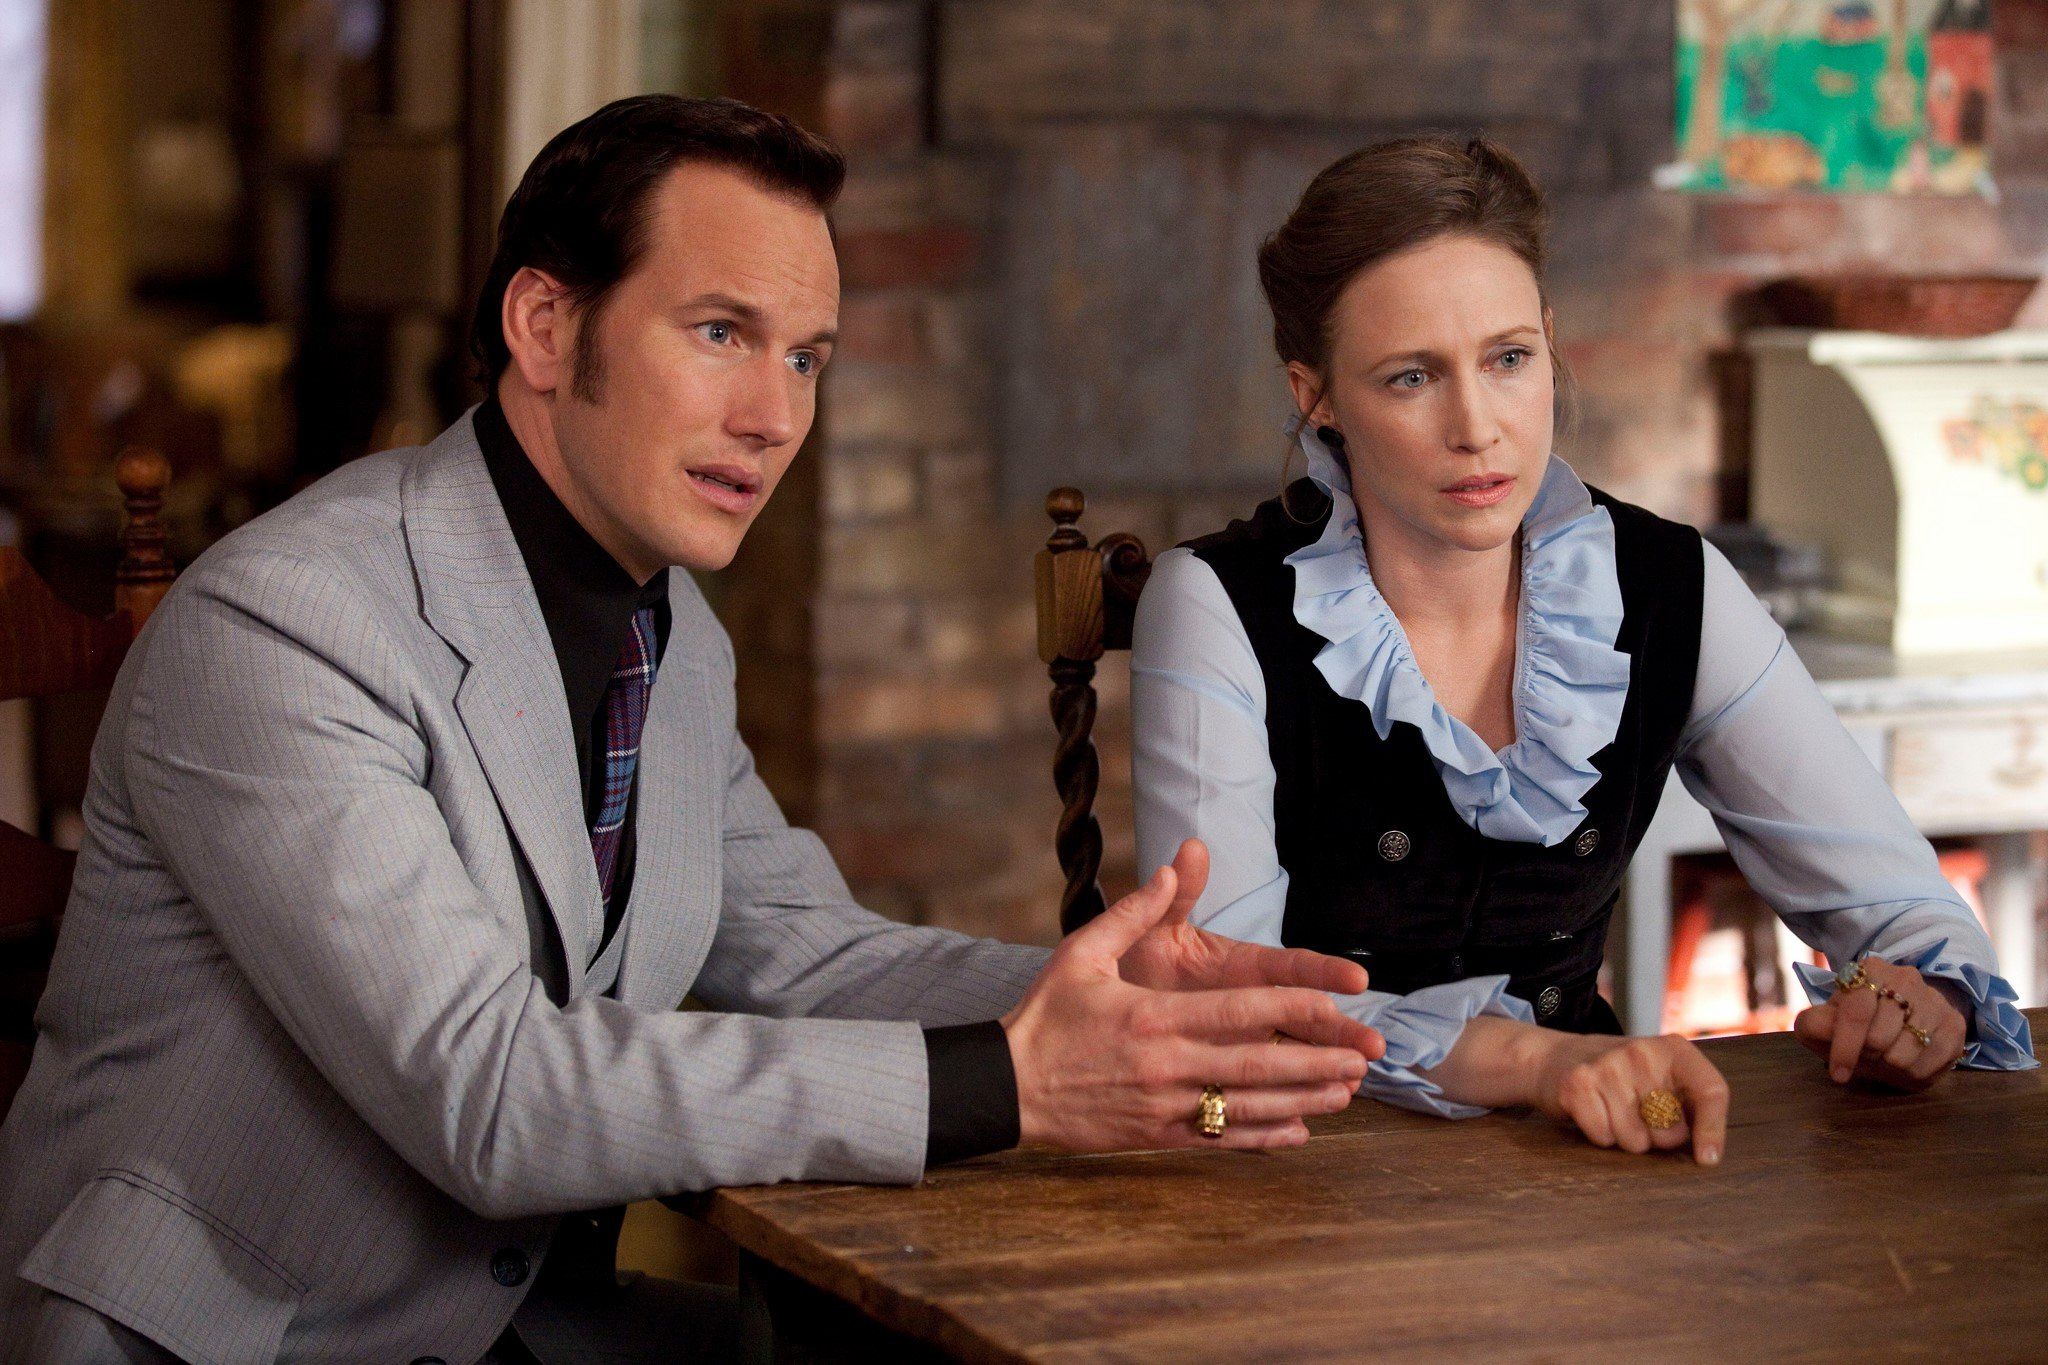 ‘The Conjuring- The Devil Made Me Do It’ trailer: Another horrifying case for the Warrens